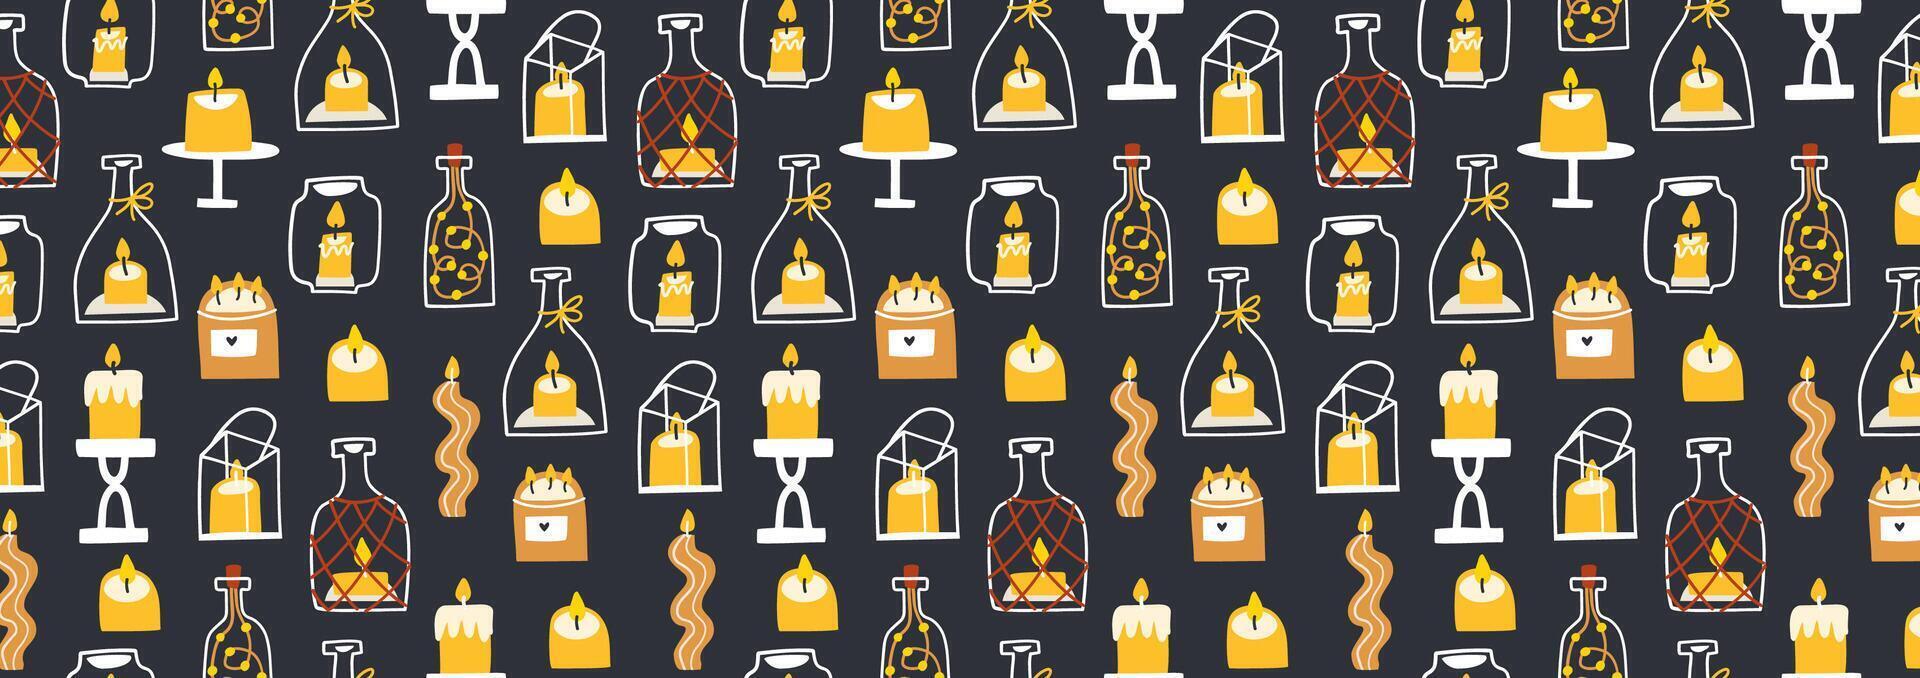 pattern with candles of different shapes and sizes. vector illustration in flat style. design for fabric, paper, background, etc.